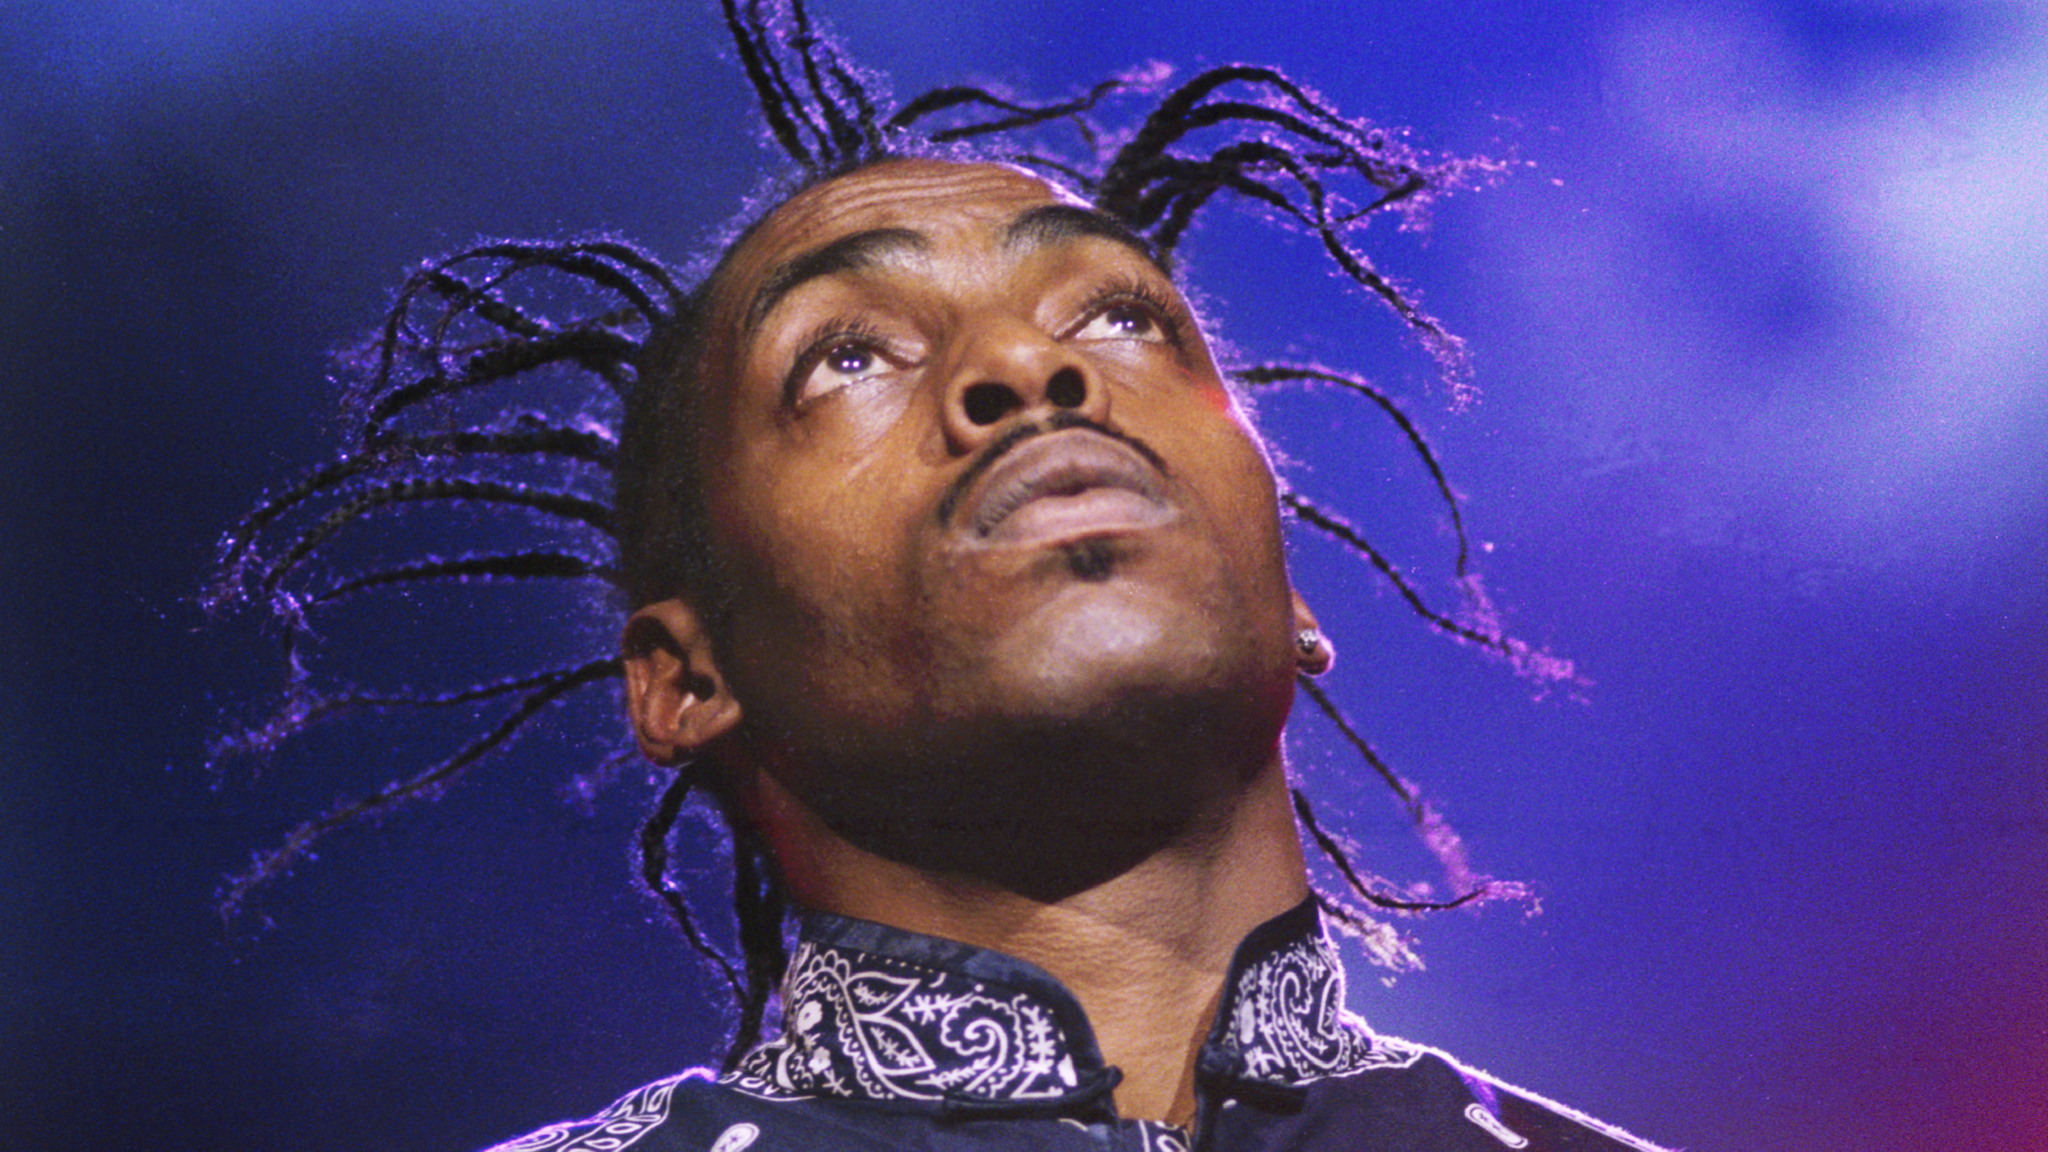 Coolio, Night of the Proms, Ahoy, Rotterdam, Netherlands, 16th November 2000.